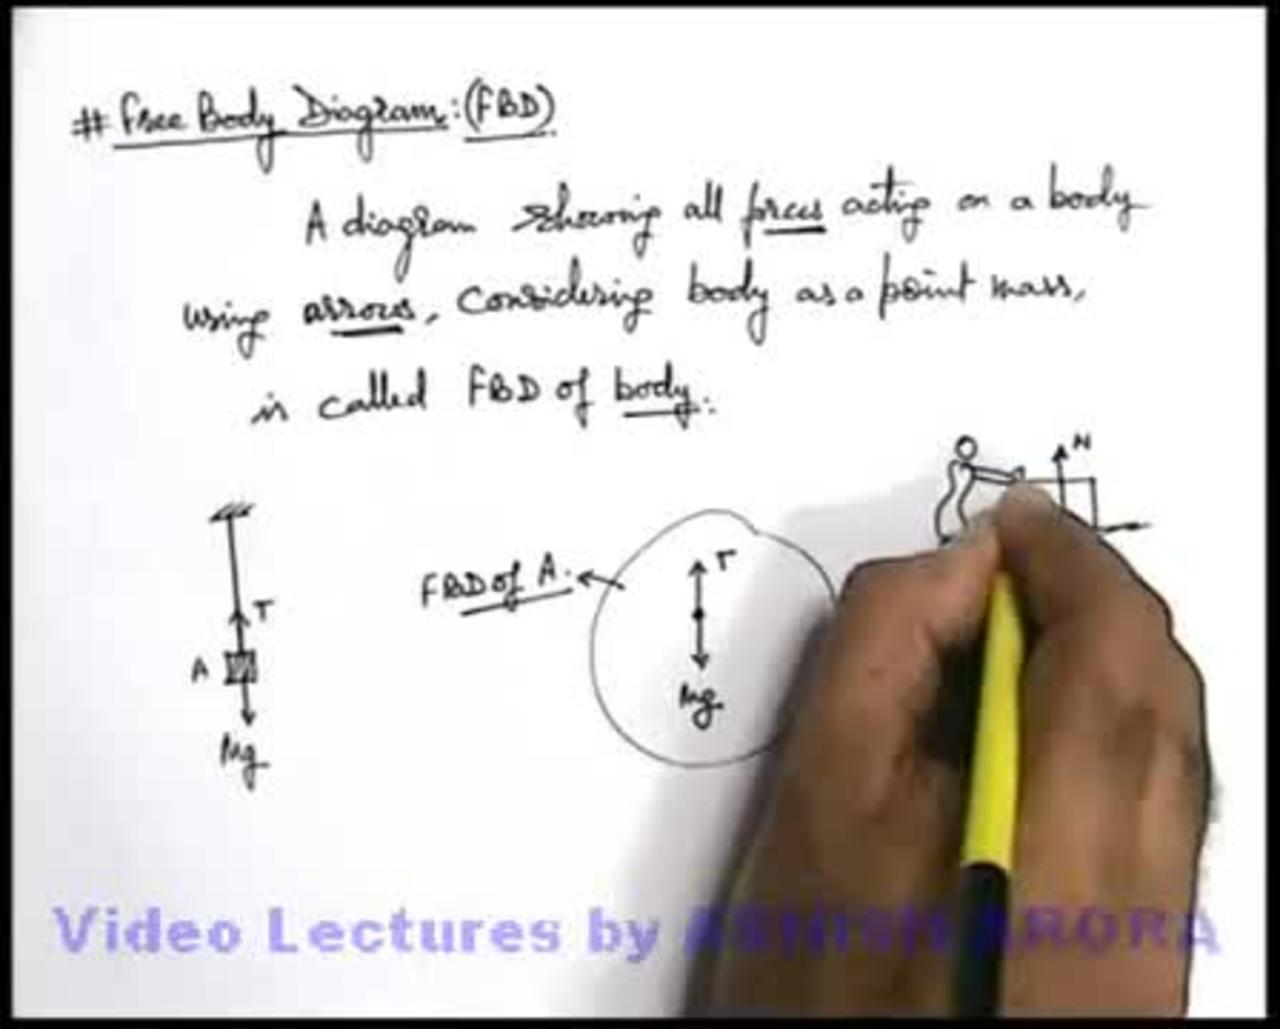 FREE BODY DIAGRAM One News Page VIDEO